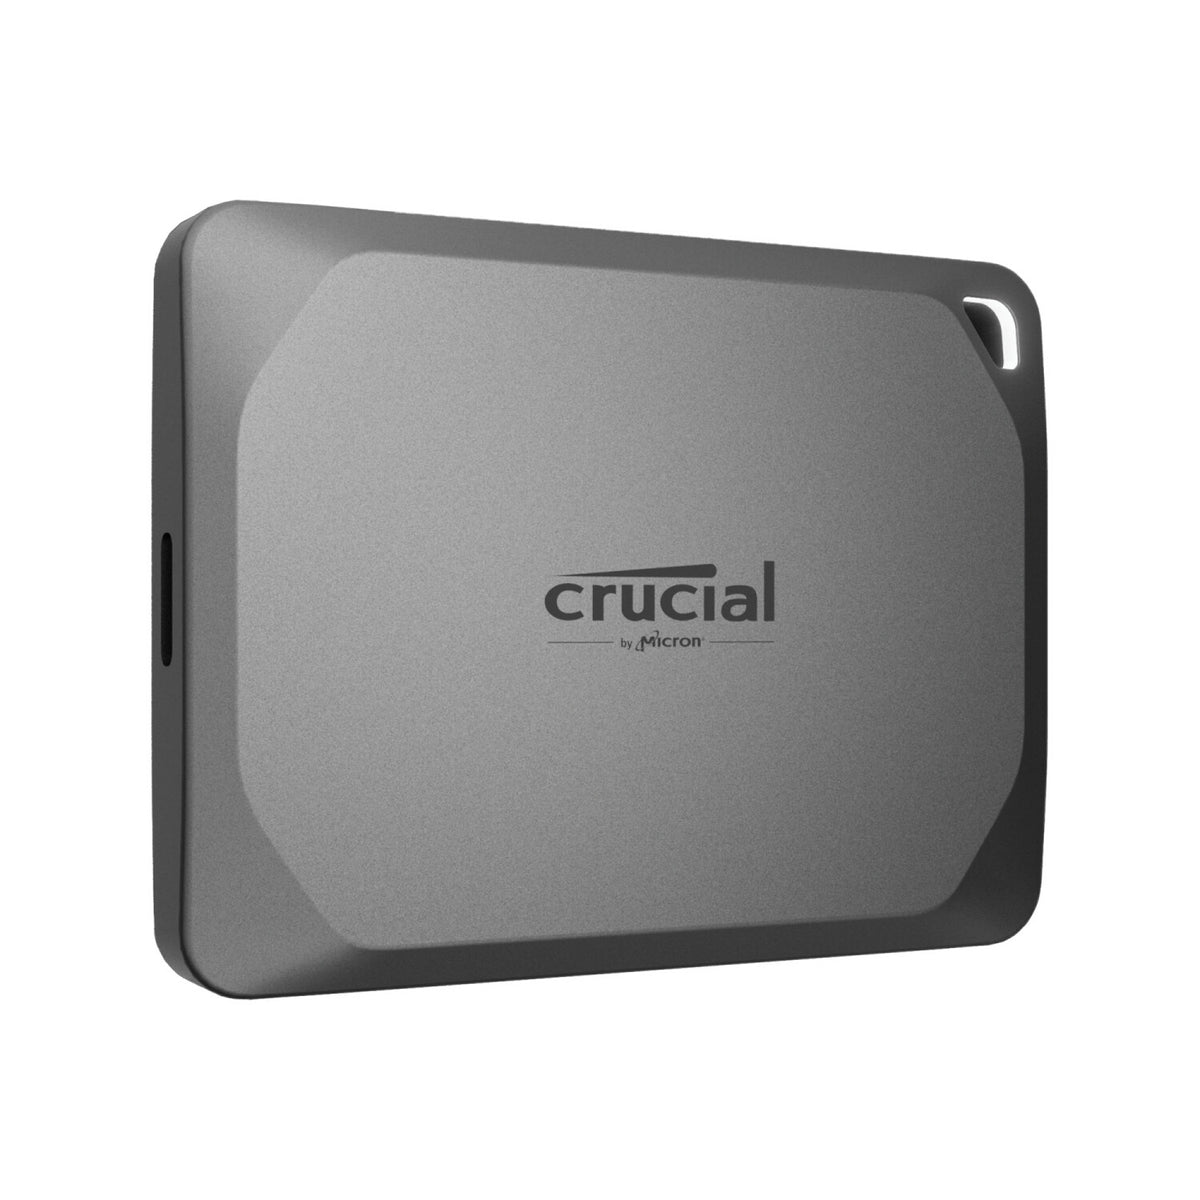 Crucial X9 Pro - External solid state drive - 1 TB